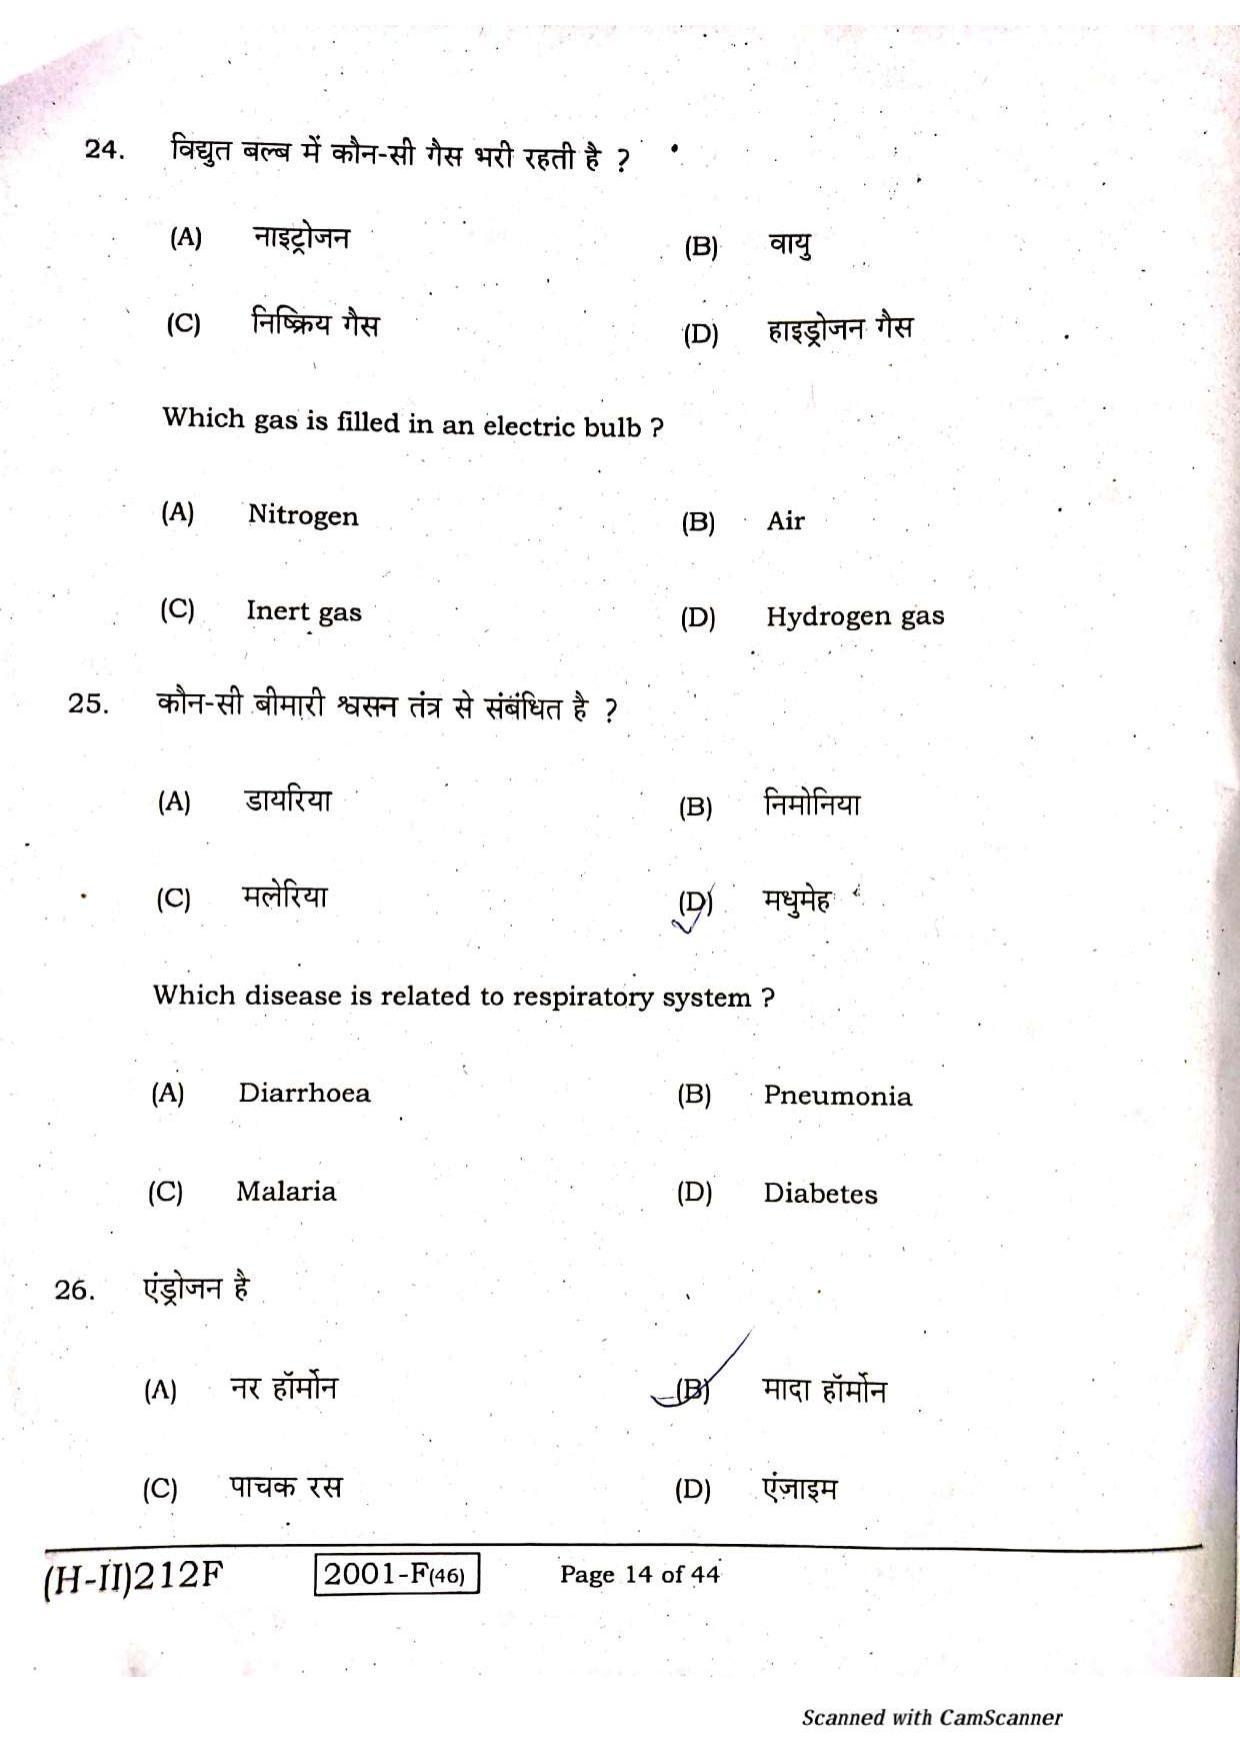 Bihar Board Class 10 Science 2021 (2nd Sitting) Question Paper - Page 12